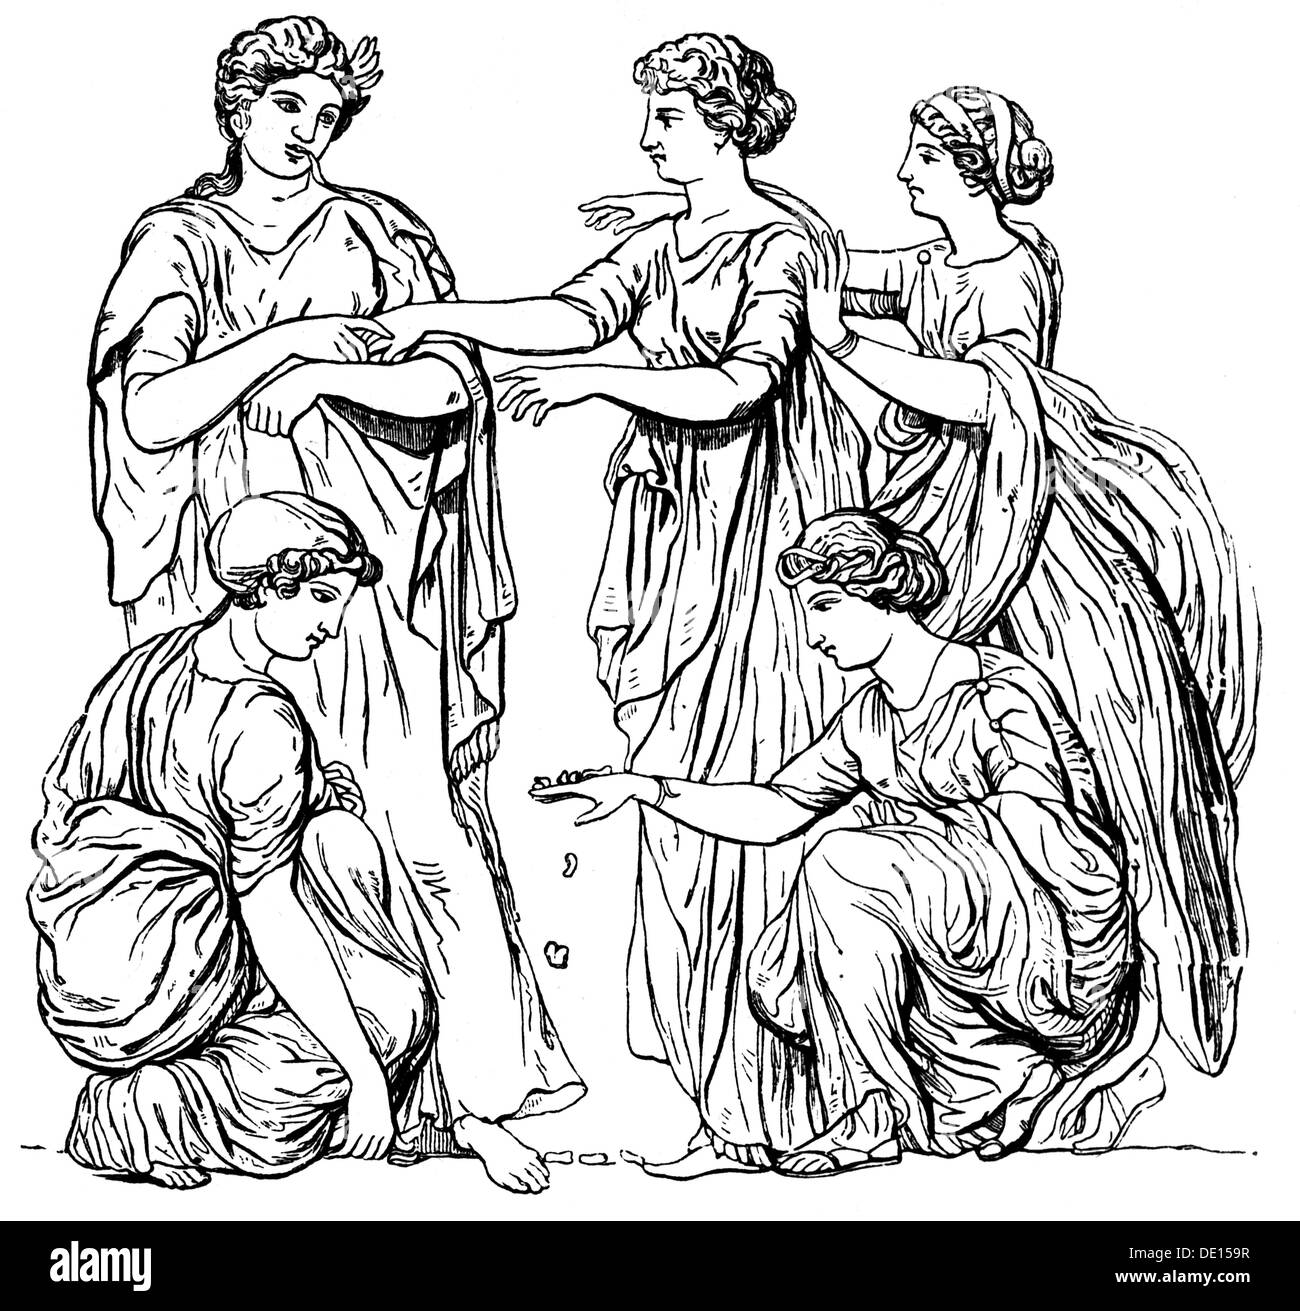 game,dice,women playing astralagoi,after painting by Alexander the Athenian,wood engraving,19th century,19th century,ancient world,ancient times,Hellenistic period,fine arts,art,Roman Empire,Rome,half length,standing,kneel,kneeling,playing,play,throw dice,play dice,sheep bone,dorsal vertebra,dorsal vertebrae,dorsal vertebras,vertebra,vertebrae,astragaloi,knucklebones,jacks,entertainment,entertainments,amusement,amusements,game,games,die,dice,art of painting,historic,historical,woman,women,female,people,ancient world,Additional-Rights-Clearences-Not Available Stock Photo